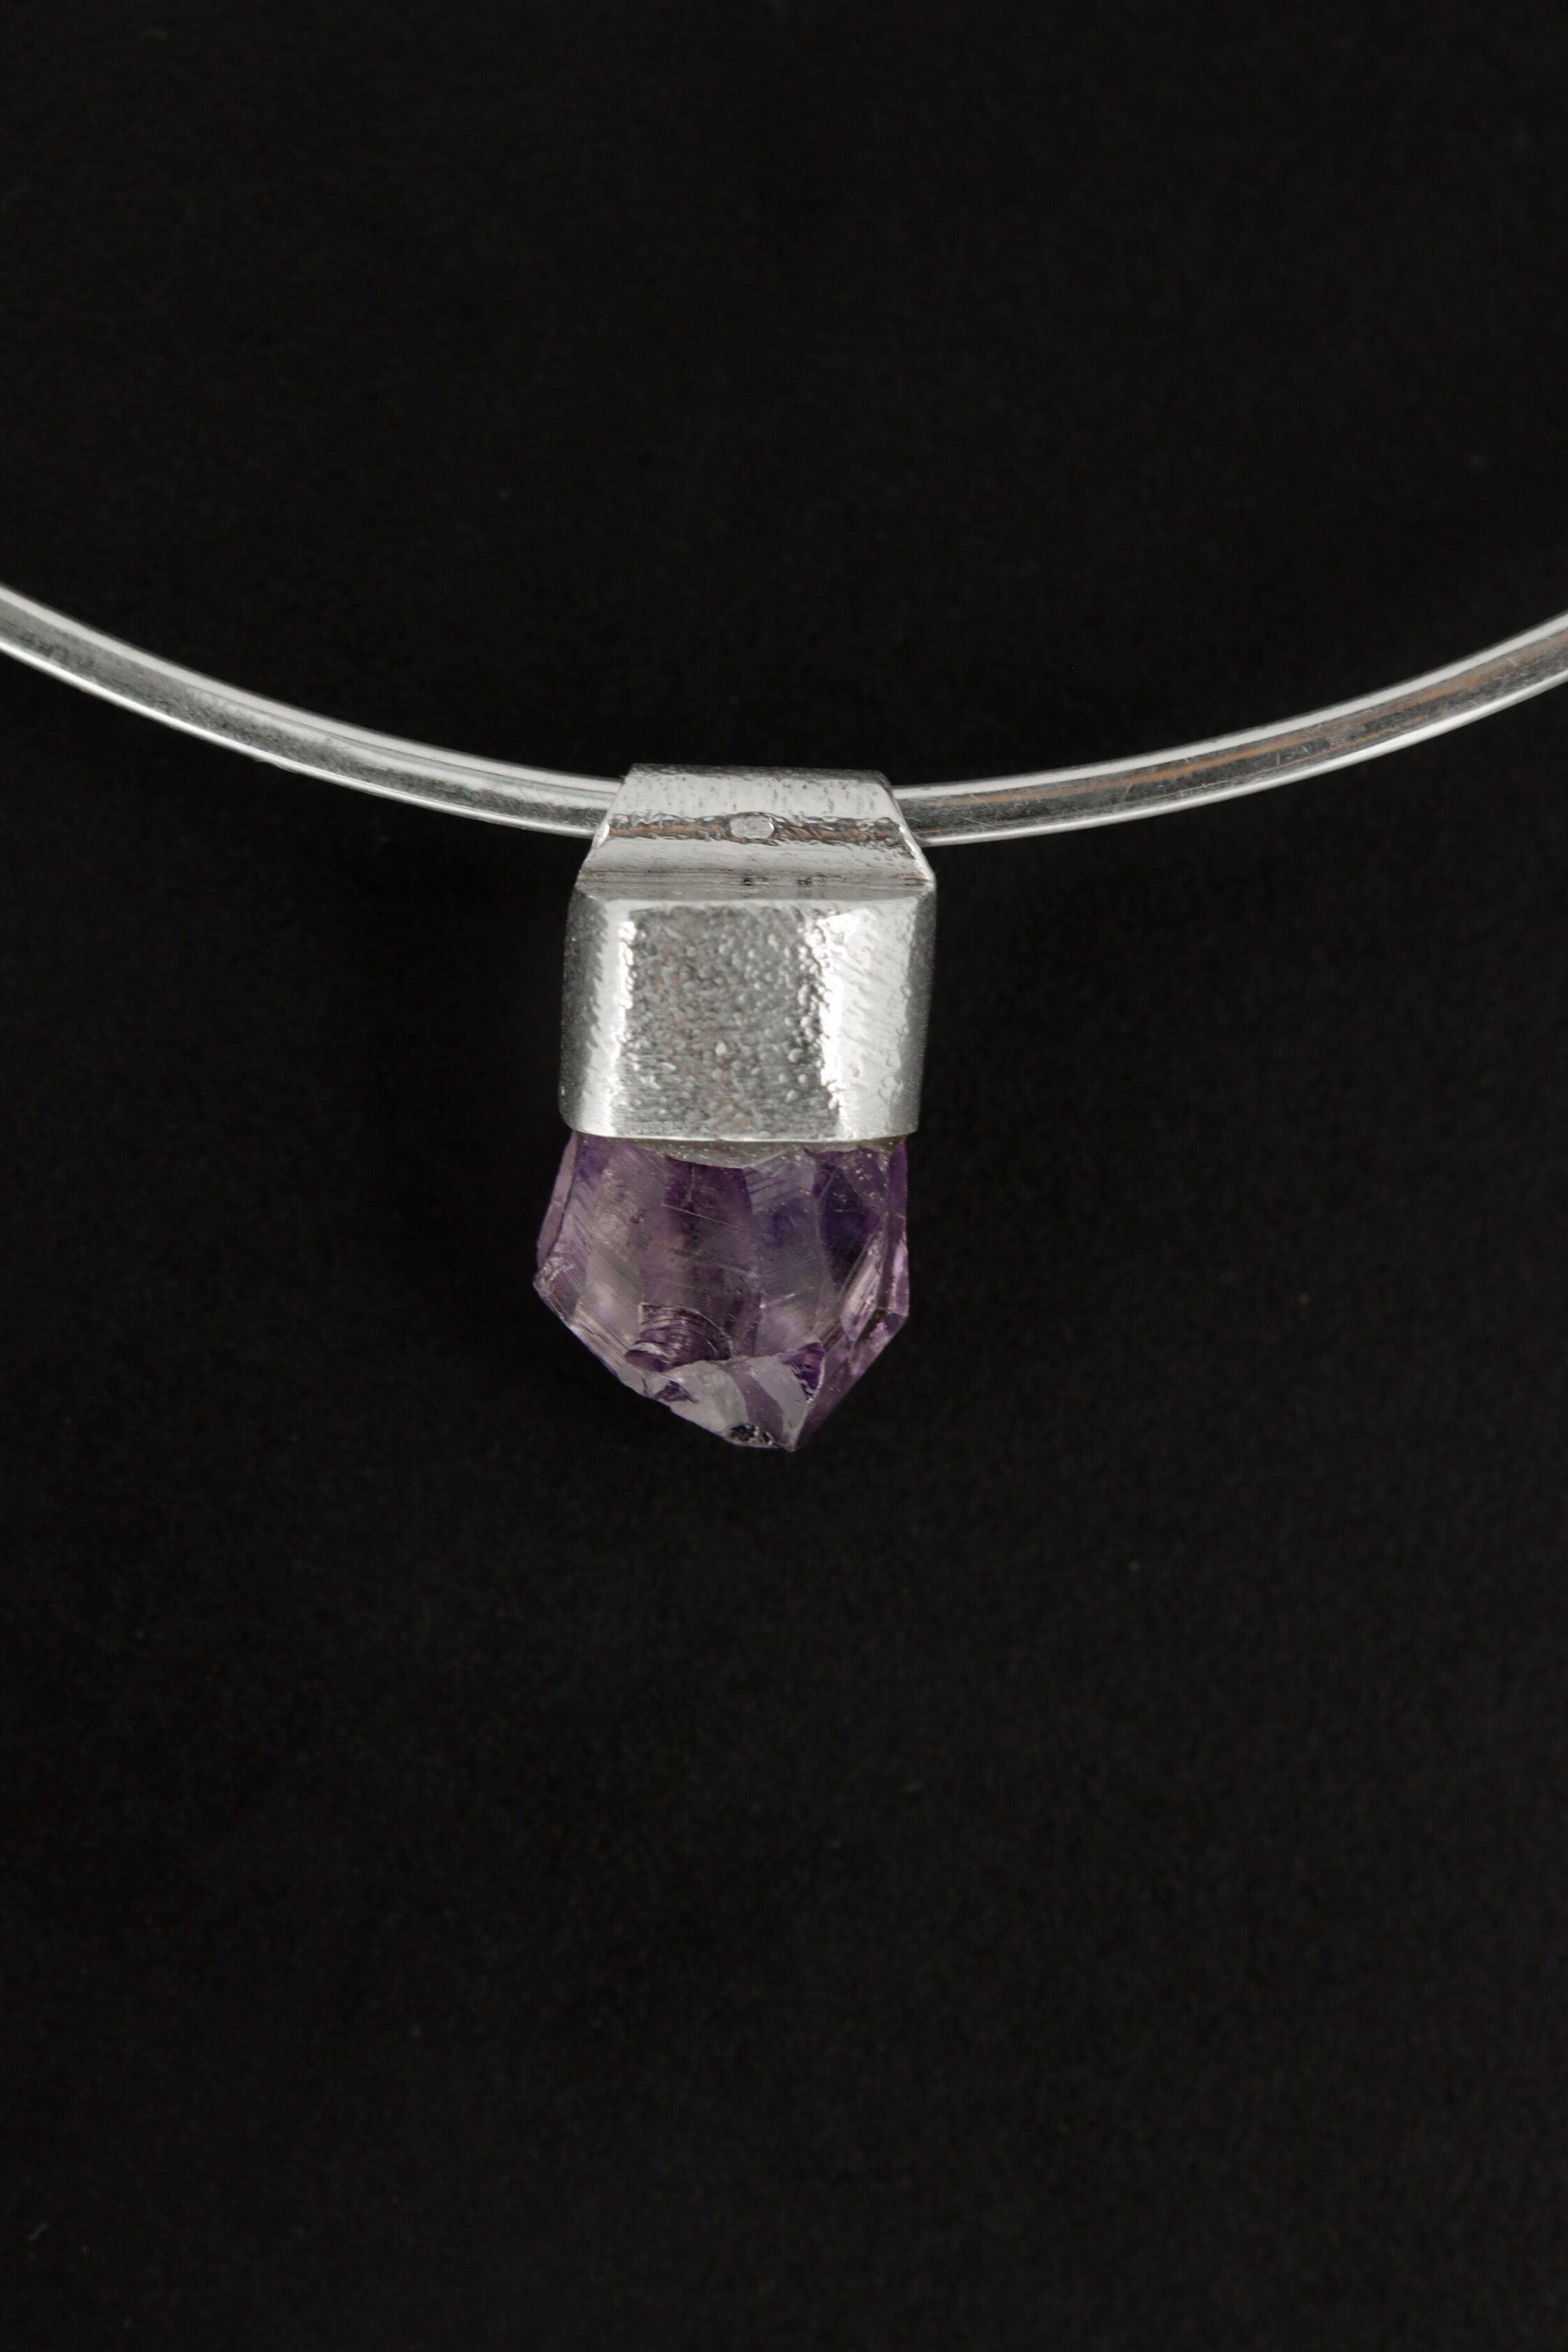 Vibrant Phantom Amethyst Point - Stack Pendant - Organic Textured 925 Sterling Silver - Crystal Necklace